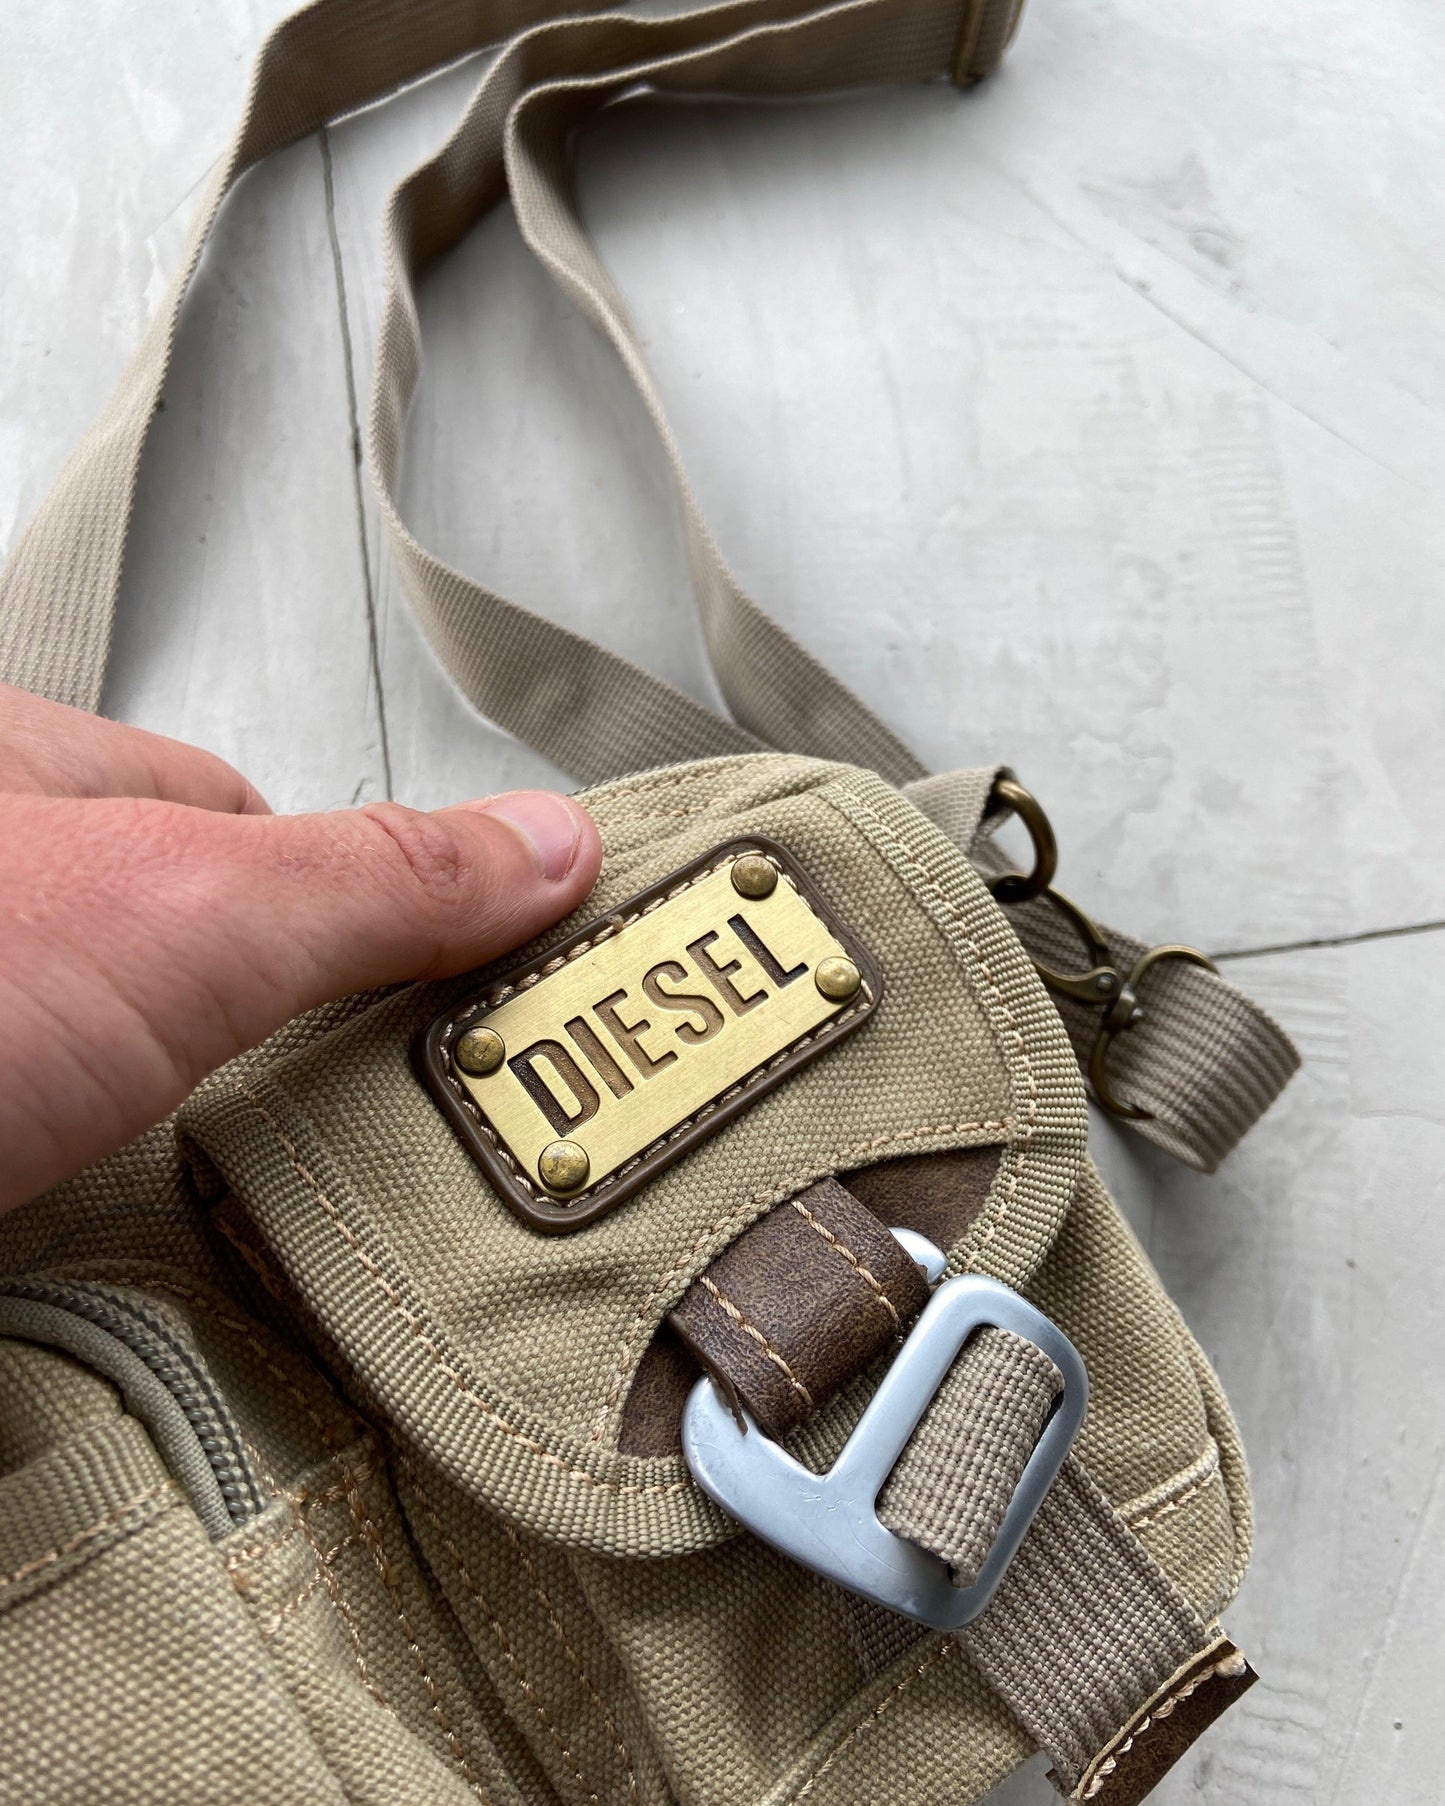 DIESEL 2000'S UTILITY CARGO SIDE BAG - Known Source